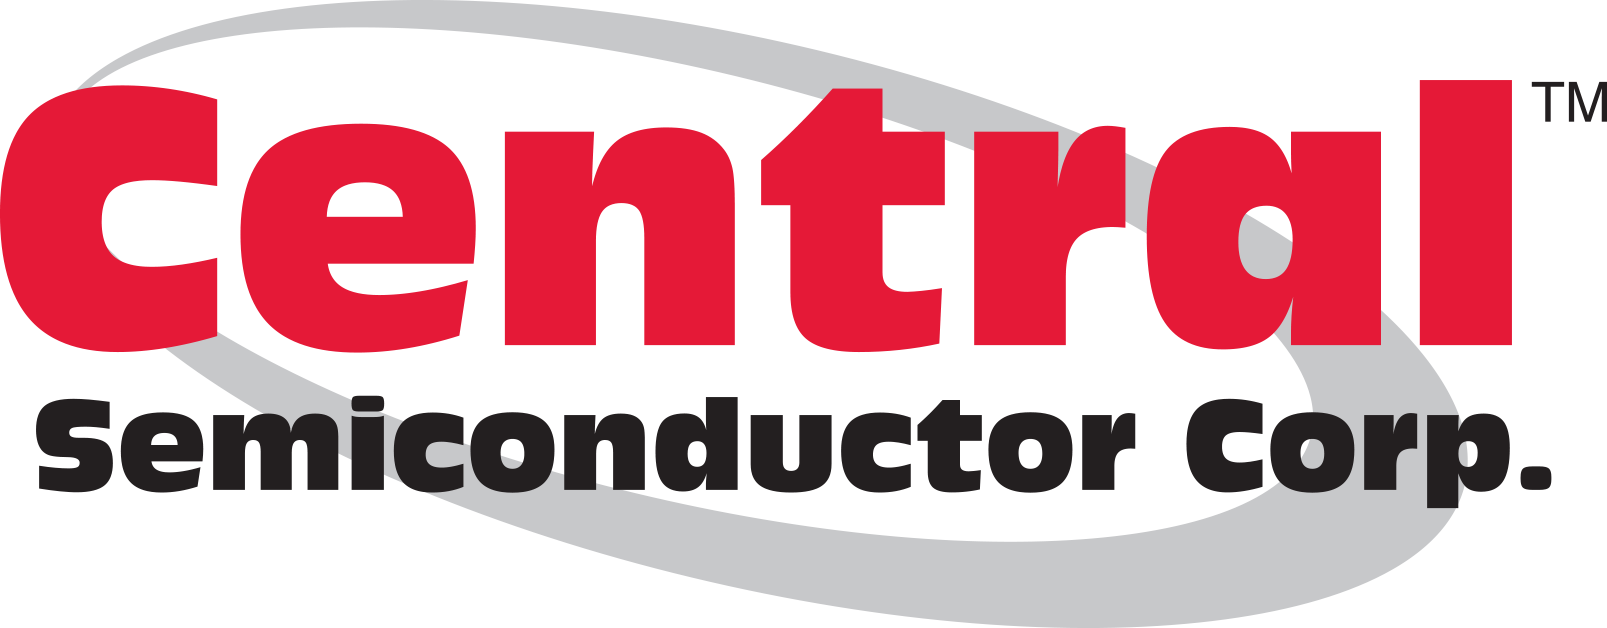 Central Semiconductor LOGO